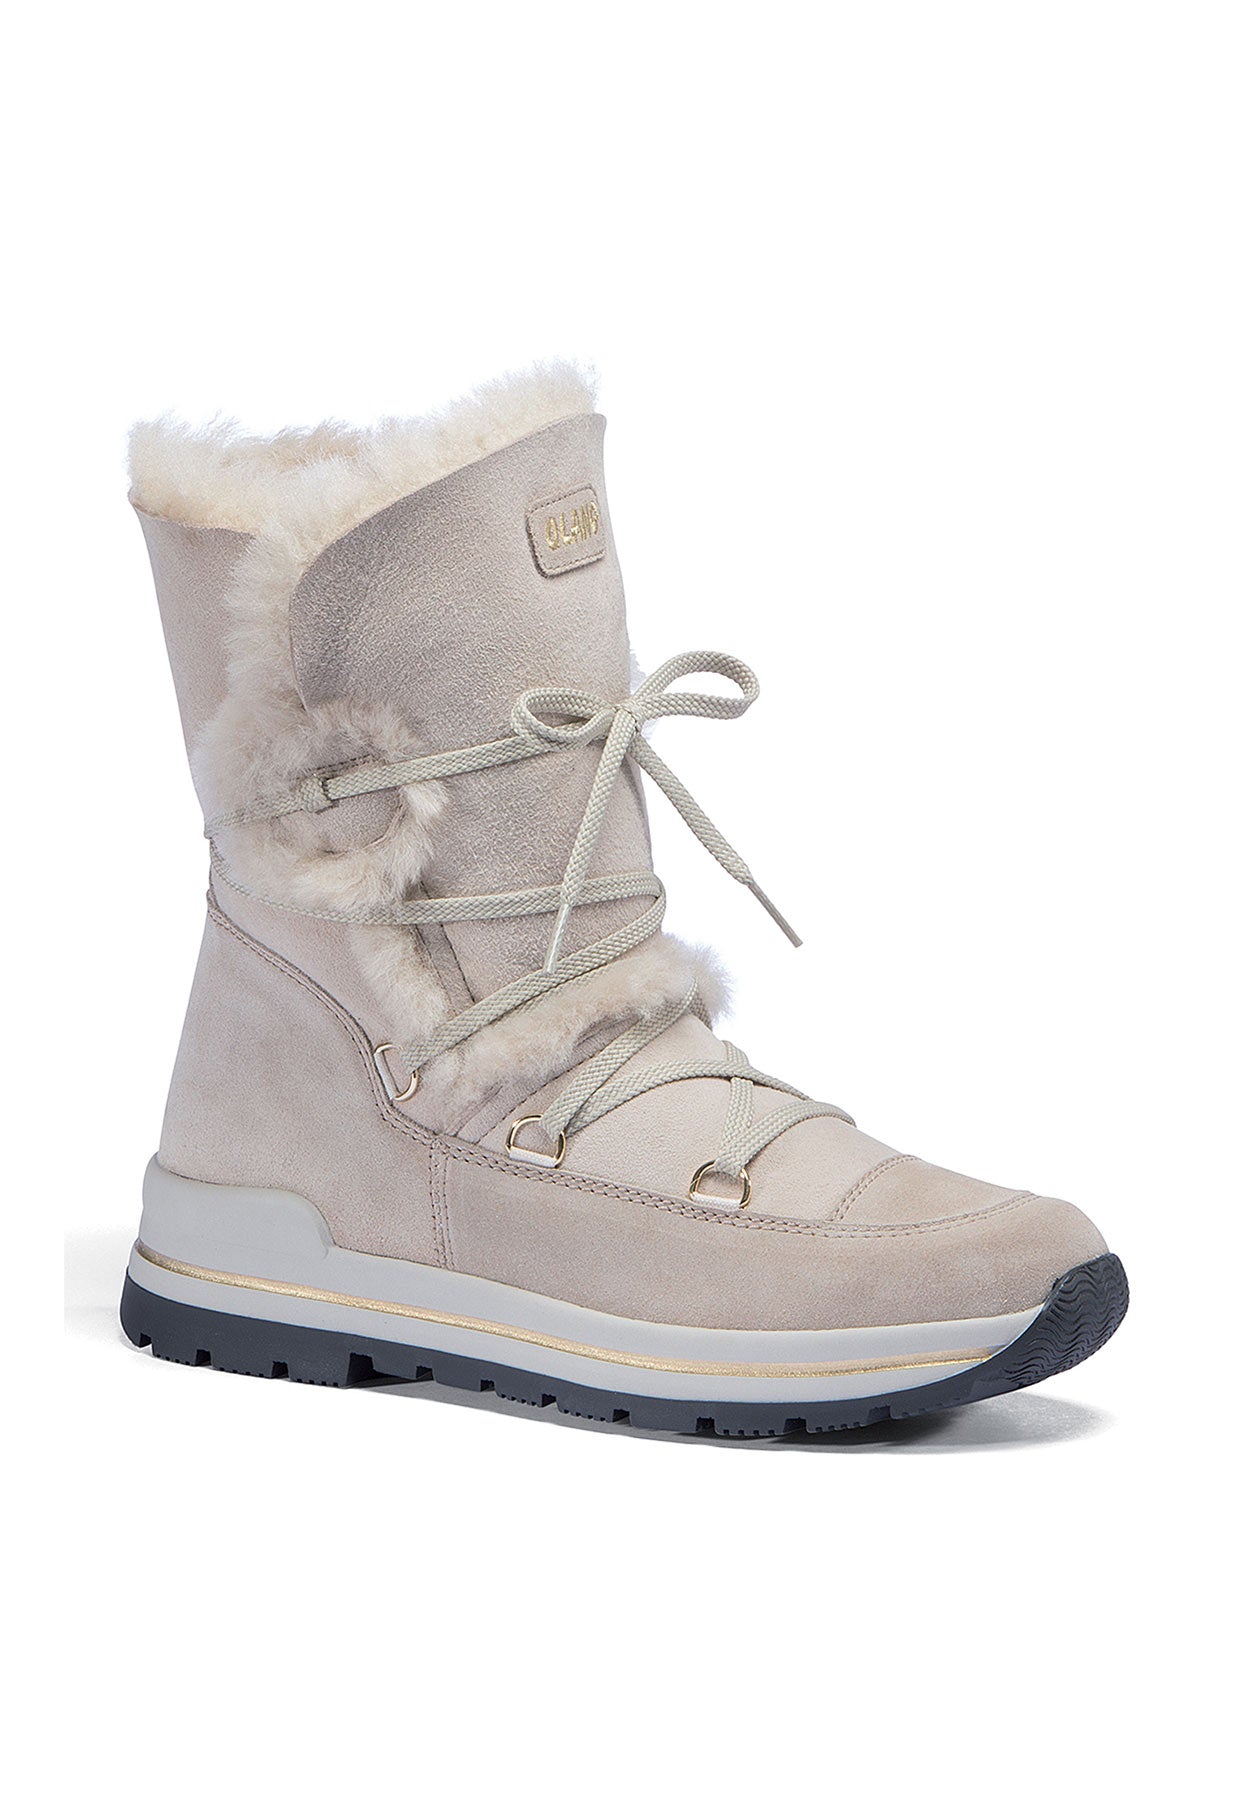 OLANG Tanya Winter Boots in Beige